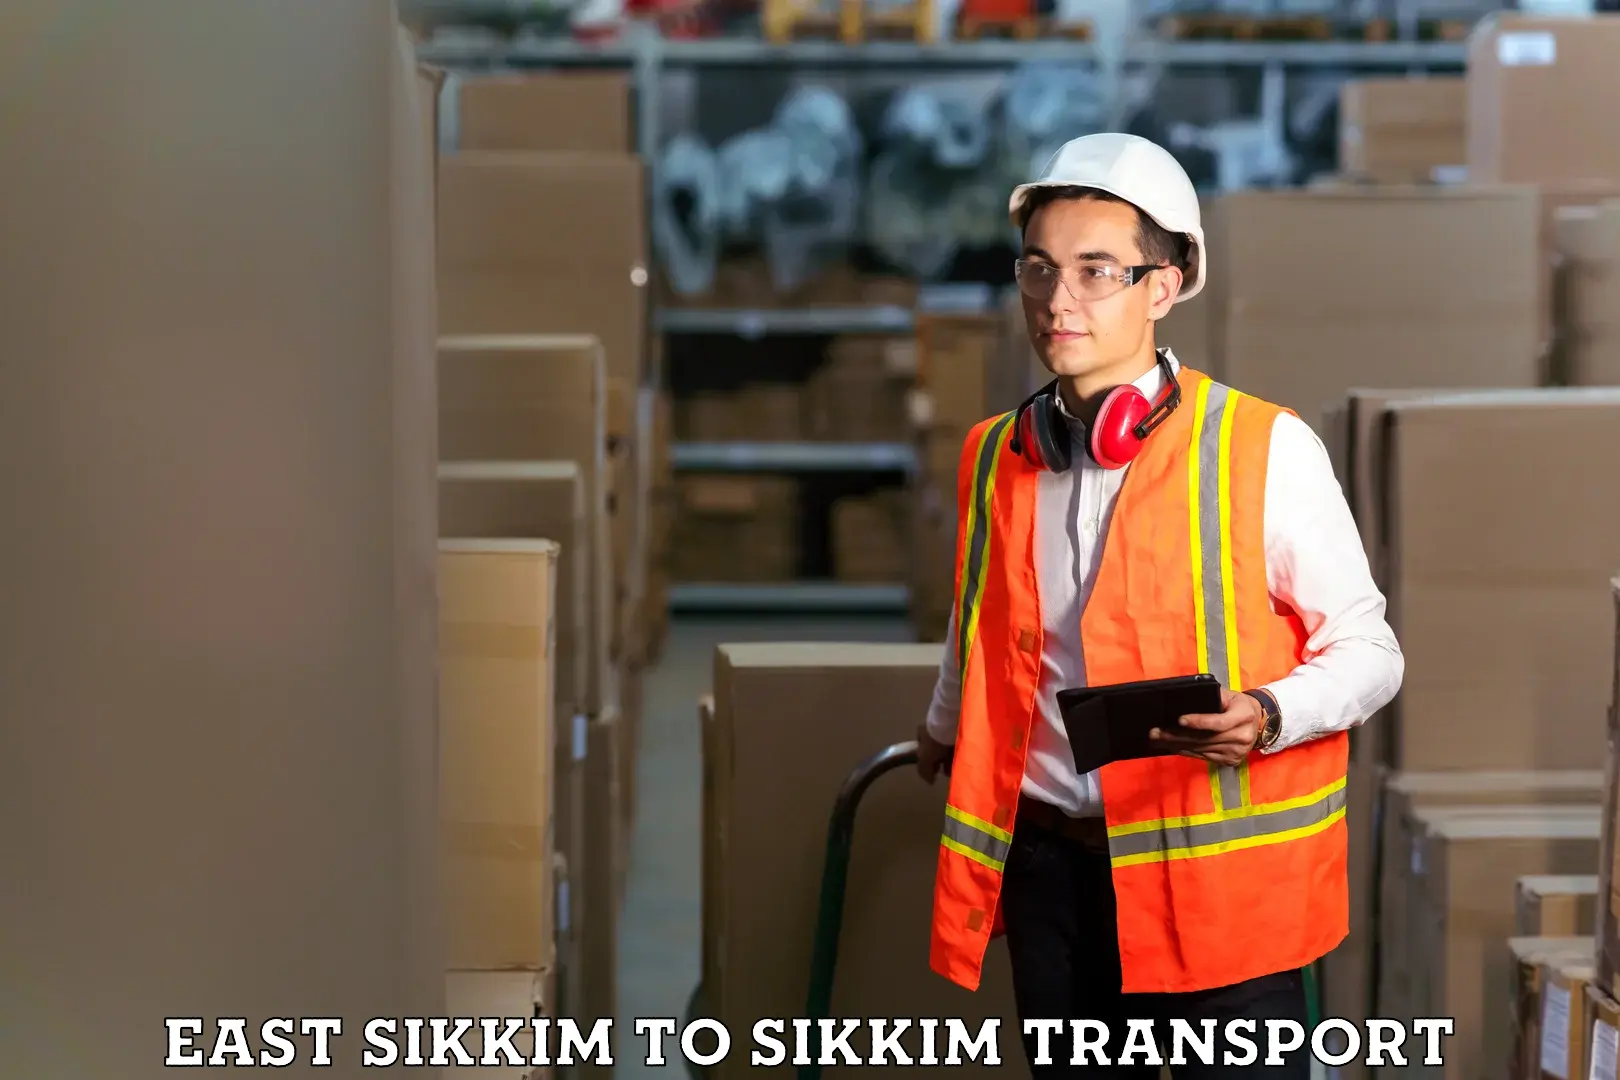 Shipping partner East Sikkim to Sikkim